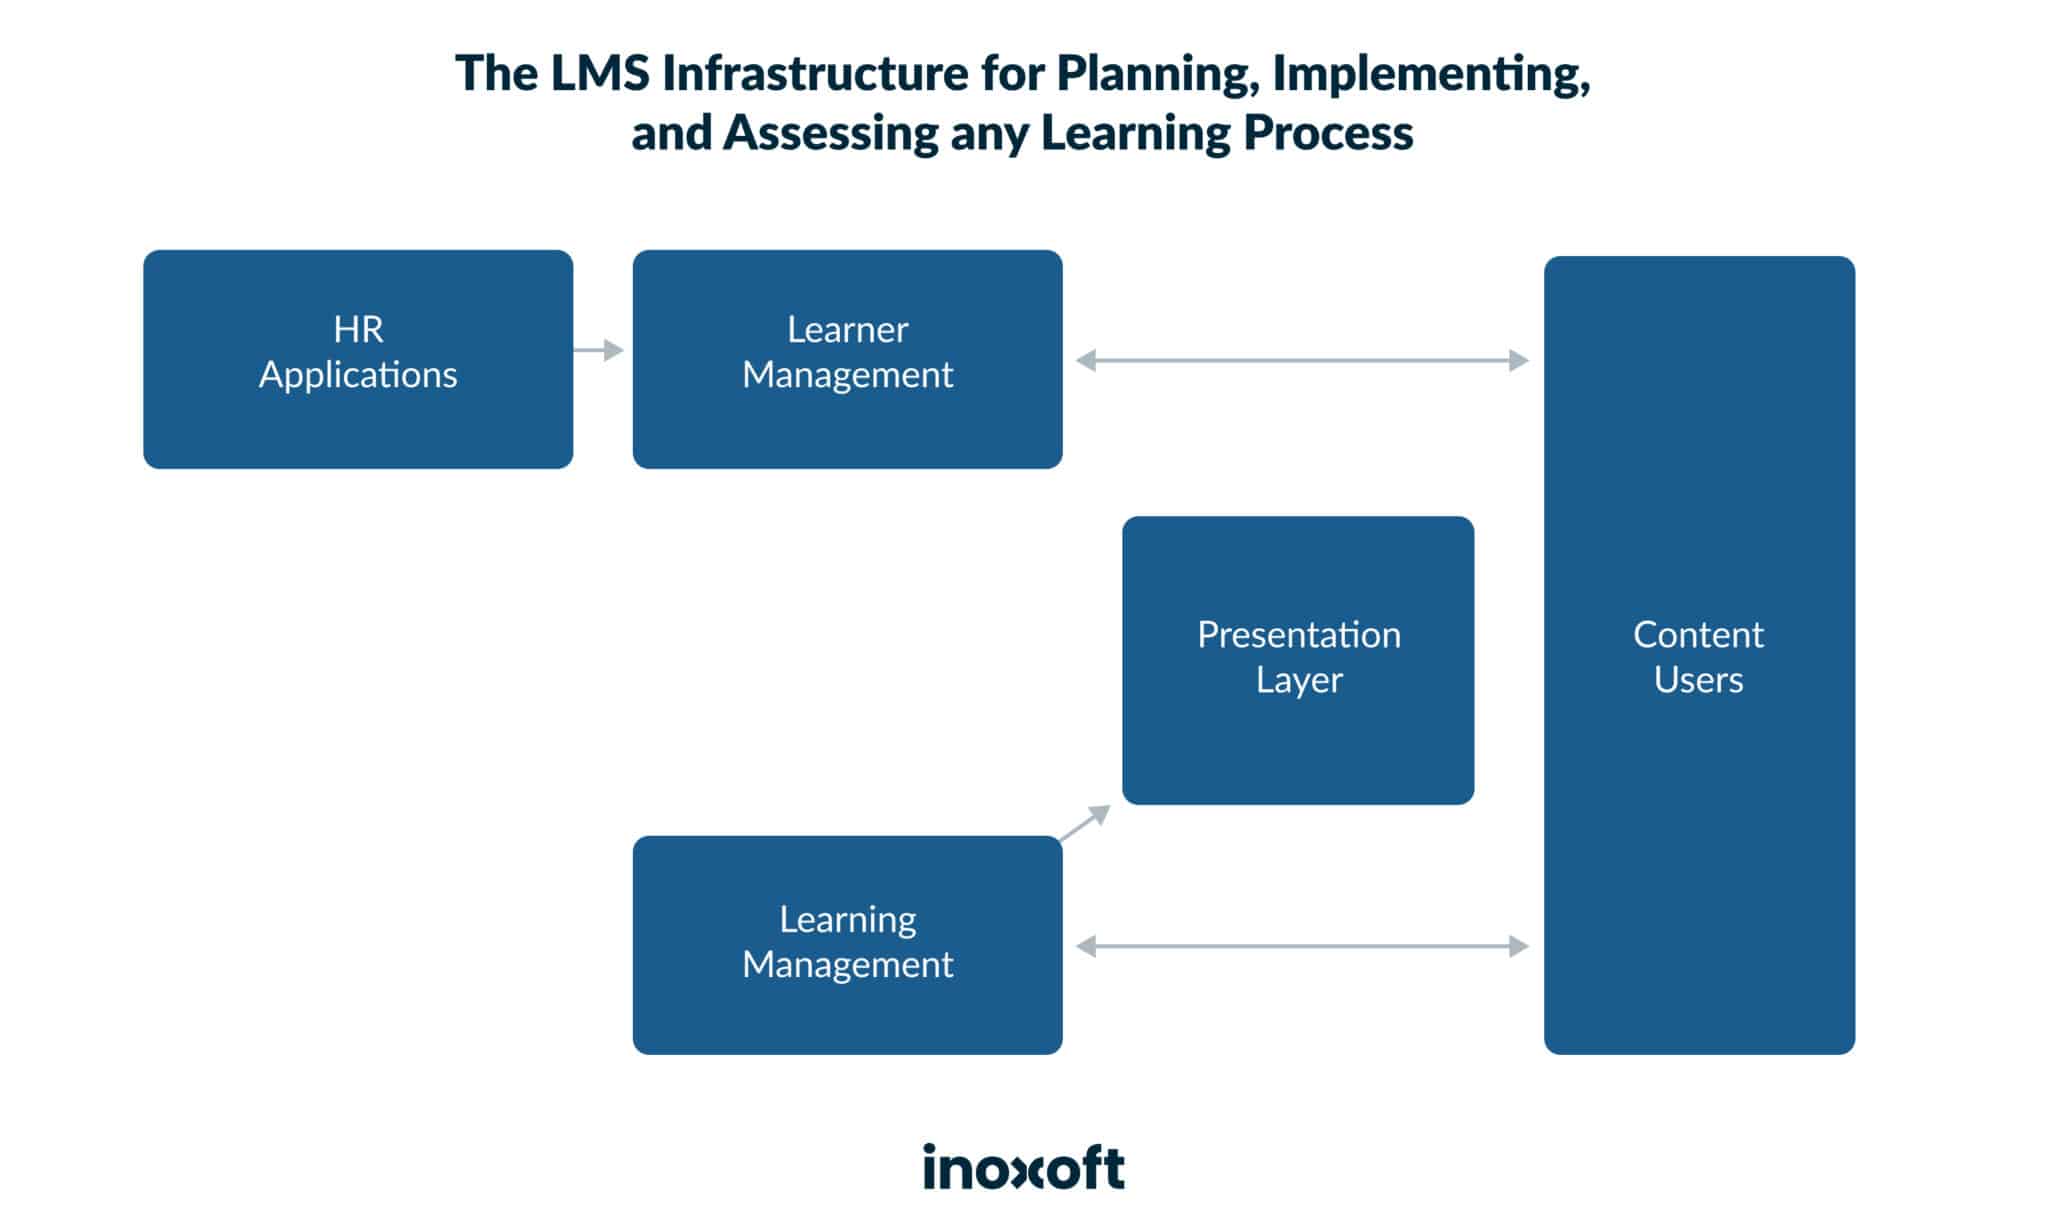 The LMS infrastructure for planning, implementing, and assessing any learning process.